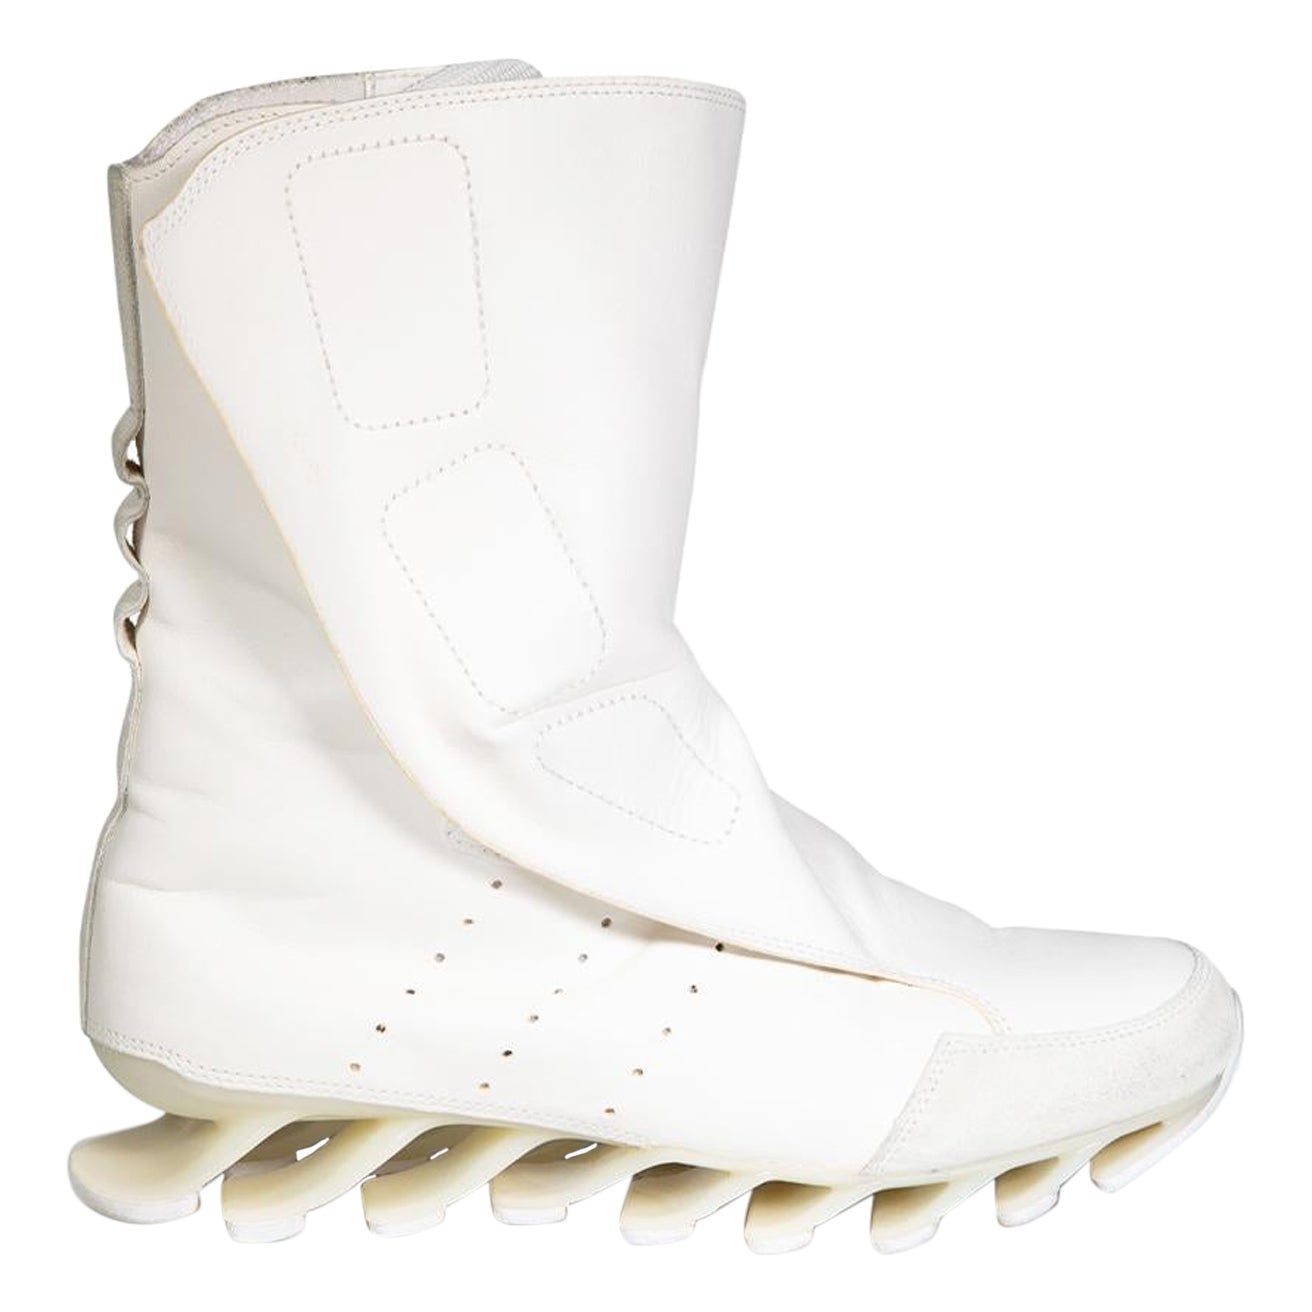 Rick Owens Adidas x Rick Owens White Leather Springblade Boots Size UK 6 For Sale